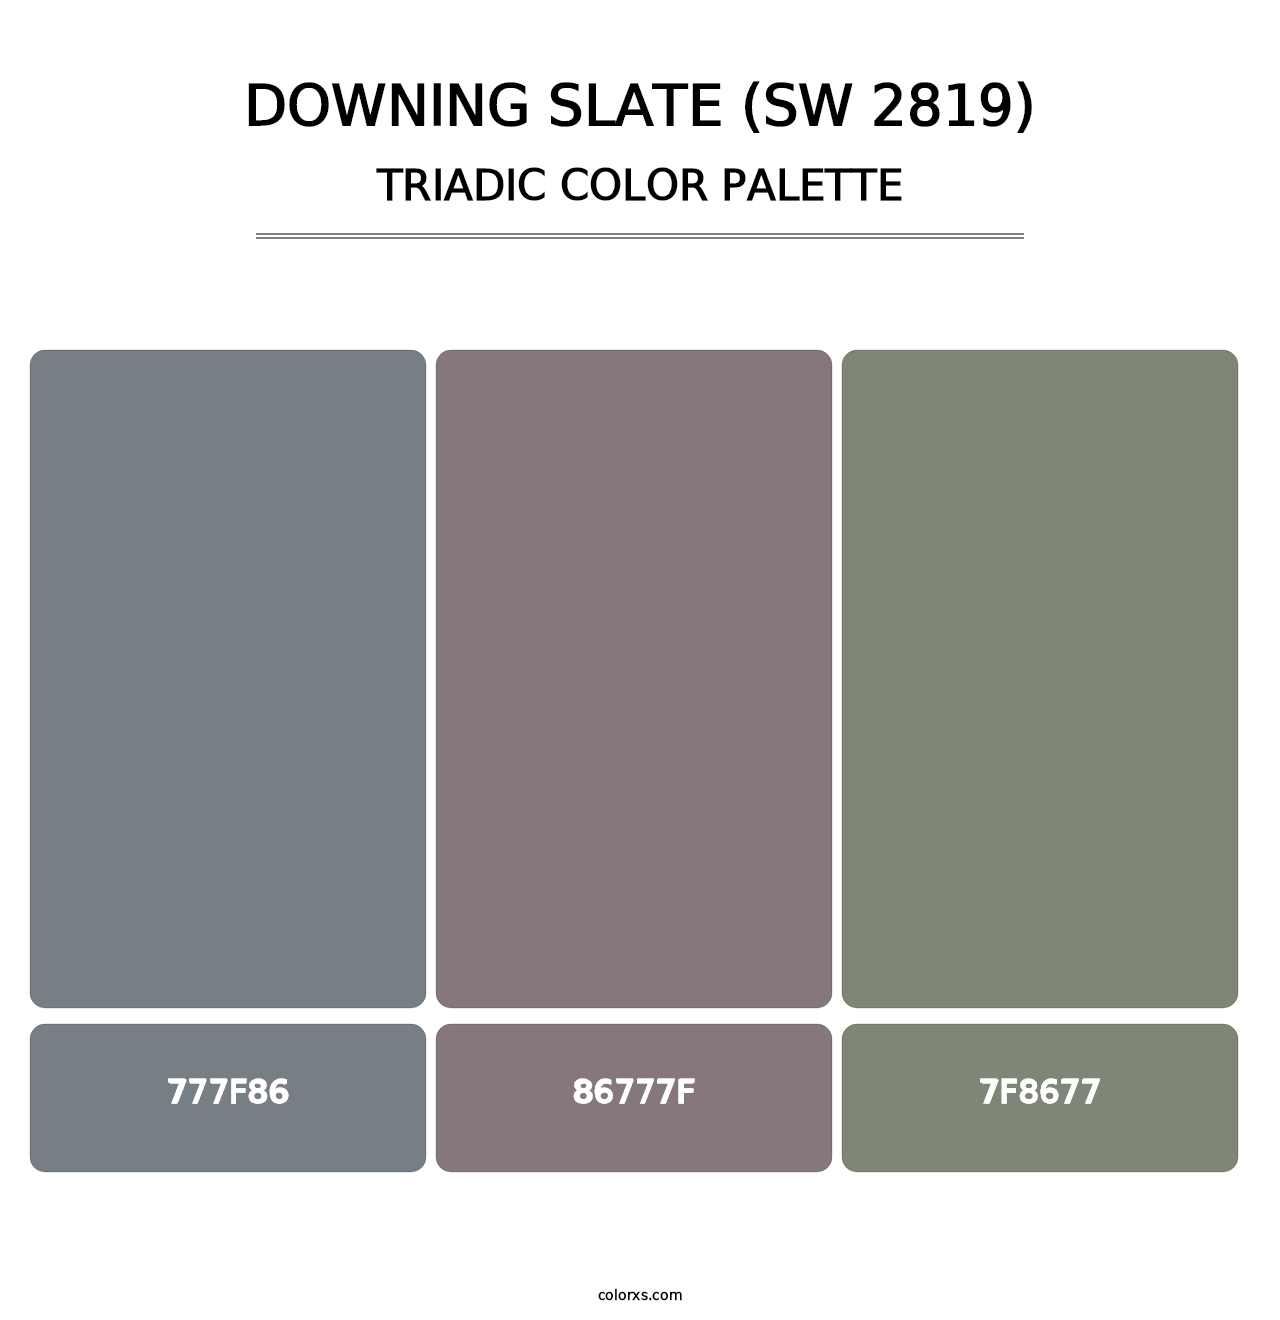 Downing Slate (SW 2819) - Triadic Color Palette